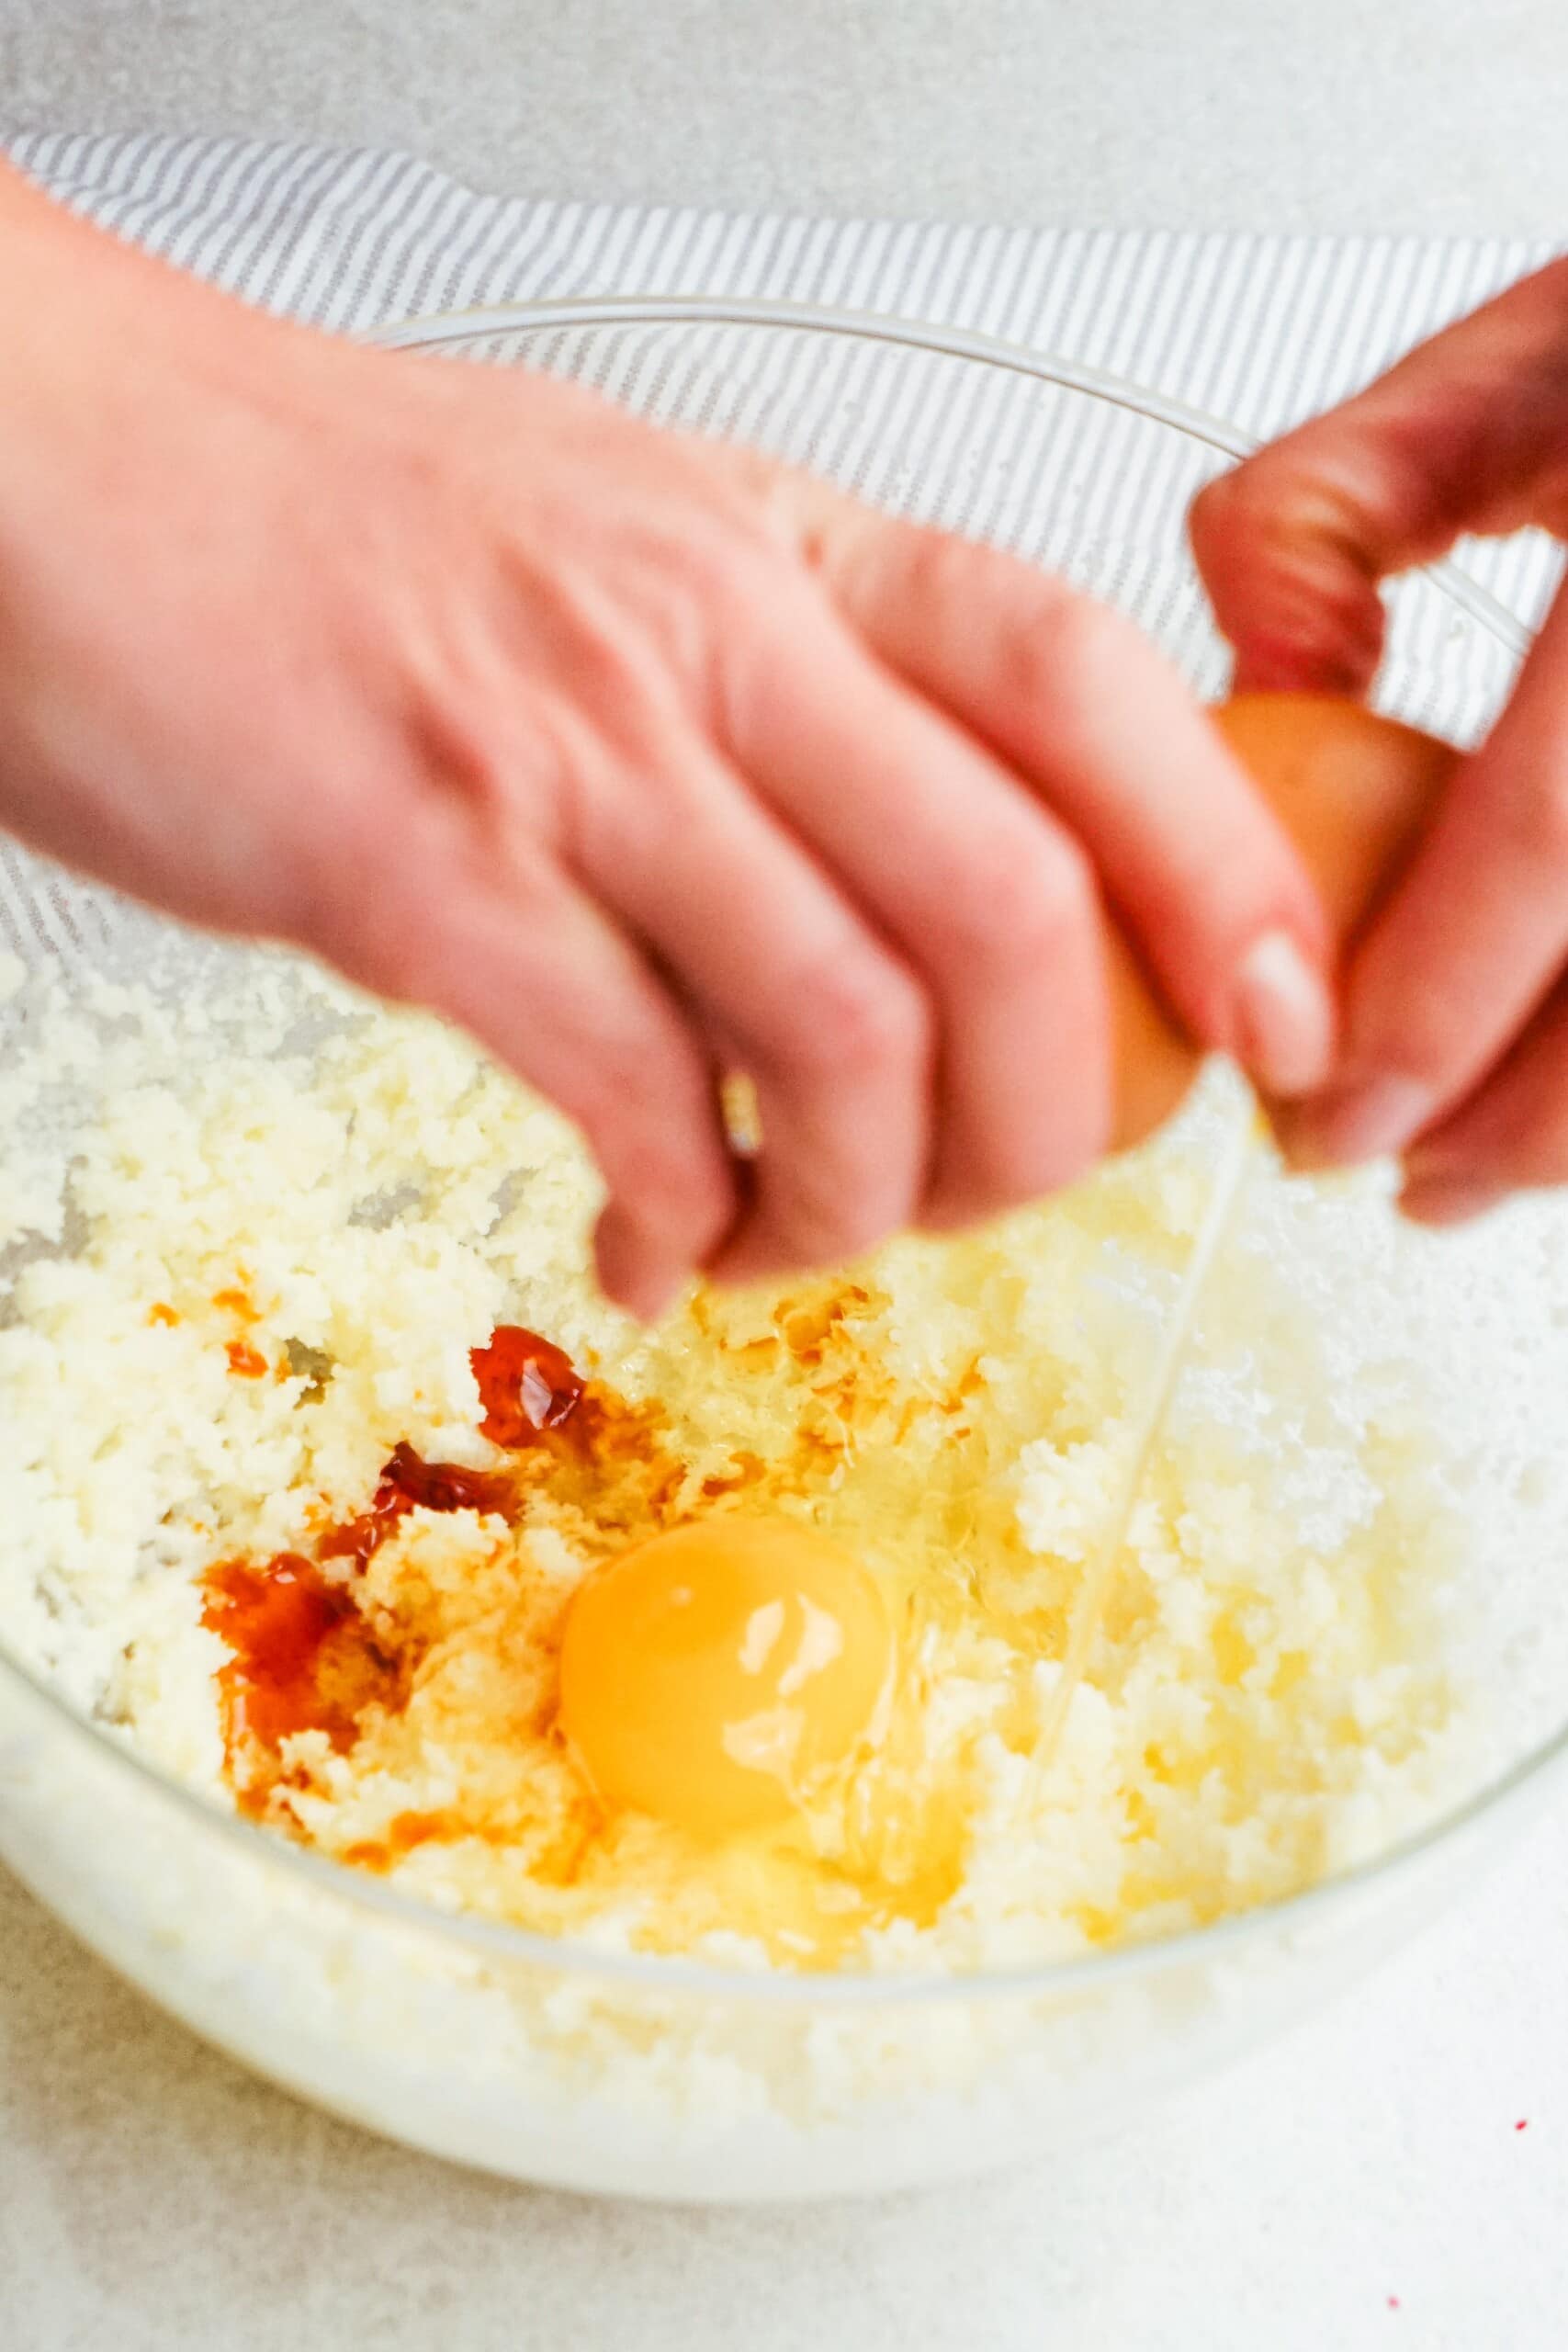 woman's hand cracking an egg into the butter mixture 